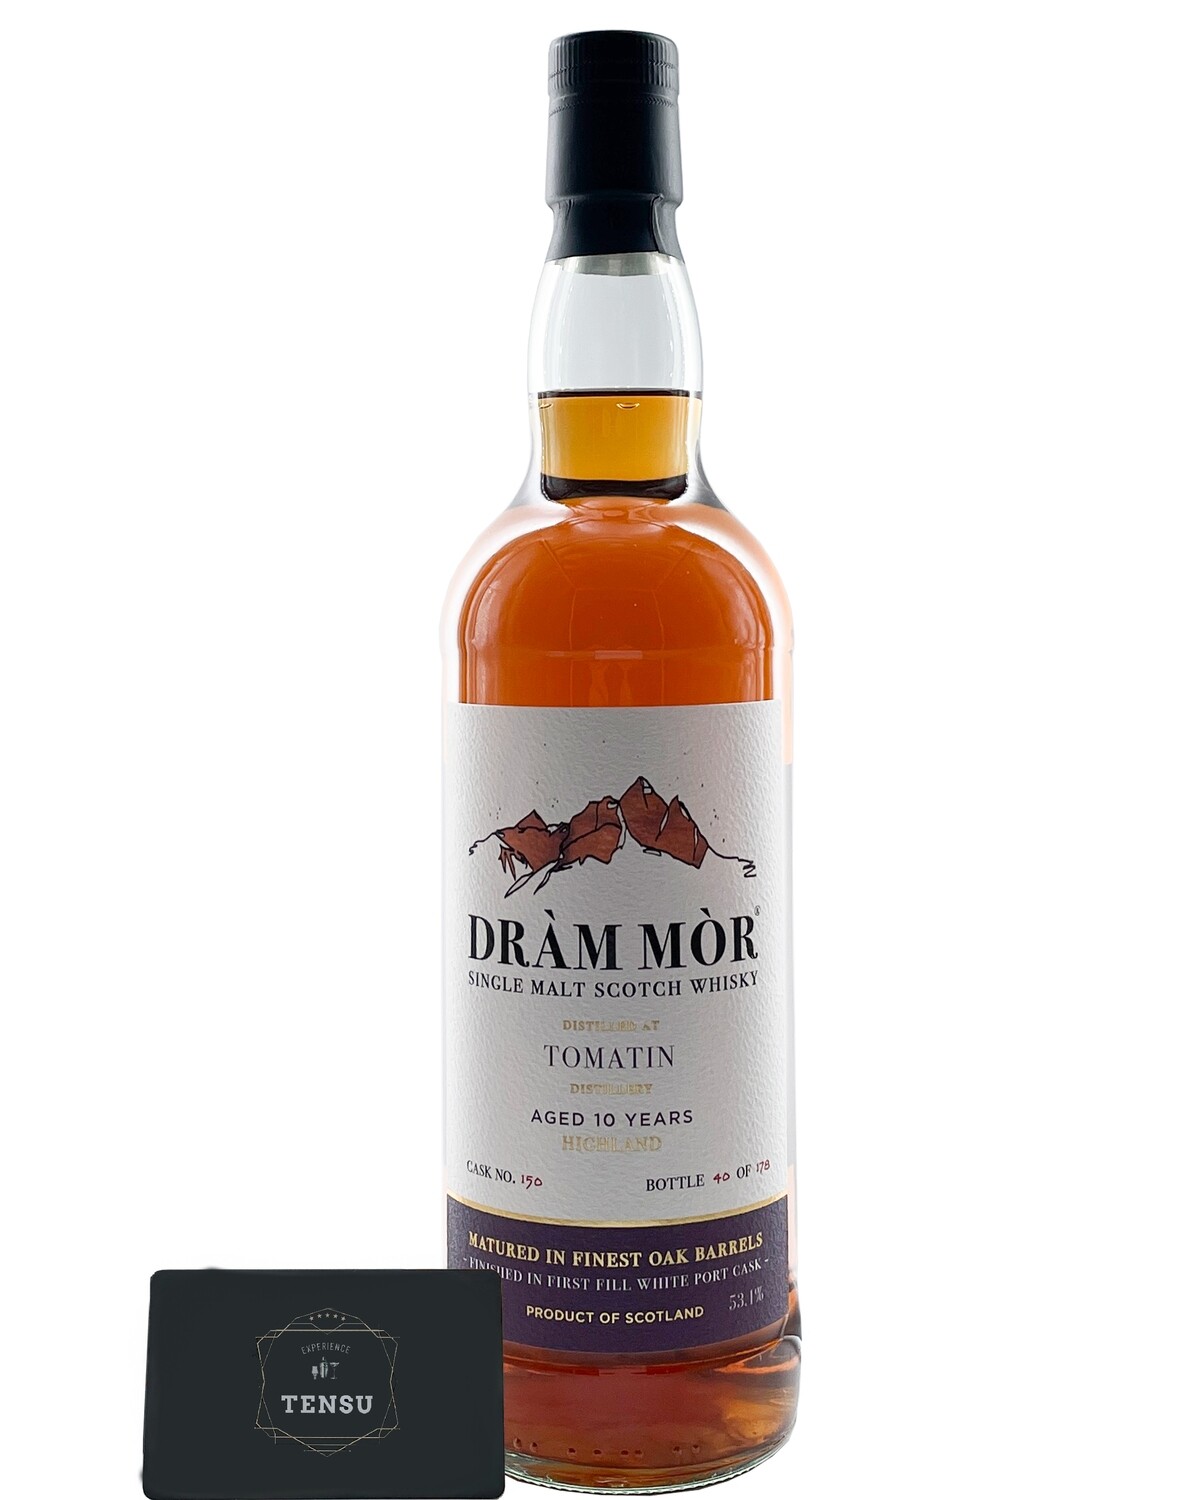 Tomatin 10Y (2021) First Fill White Port Cask Finish 53.1 "Dram Mor"